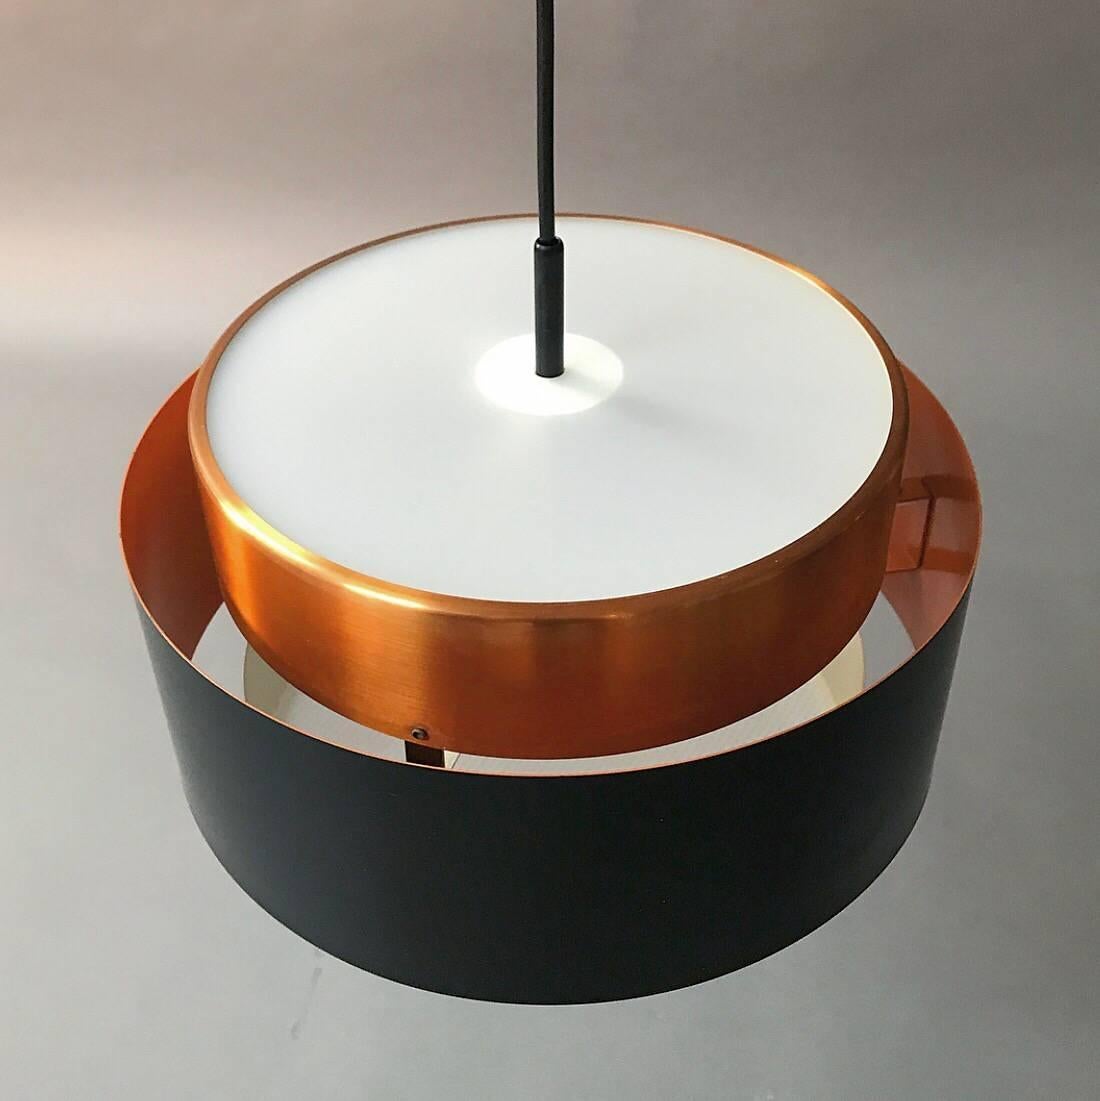 One of the absolute crown jewels of Jo Hammerborg designed in 1963 for Fog & Mørup, Denmark.

One of the leading lighting manufactures in Denmark known for there high quality this Saturn pendant is a stunning example upon that.

Made from black